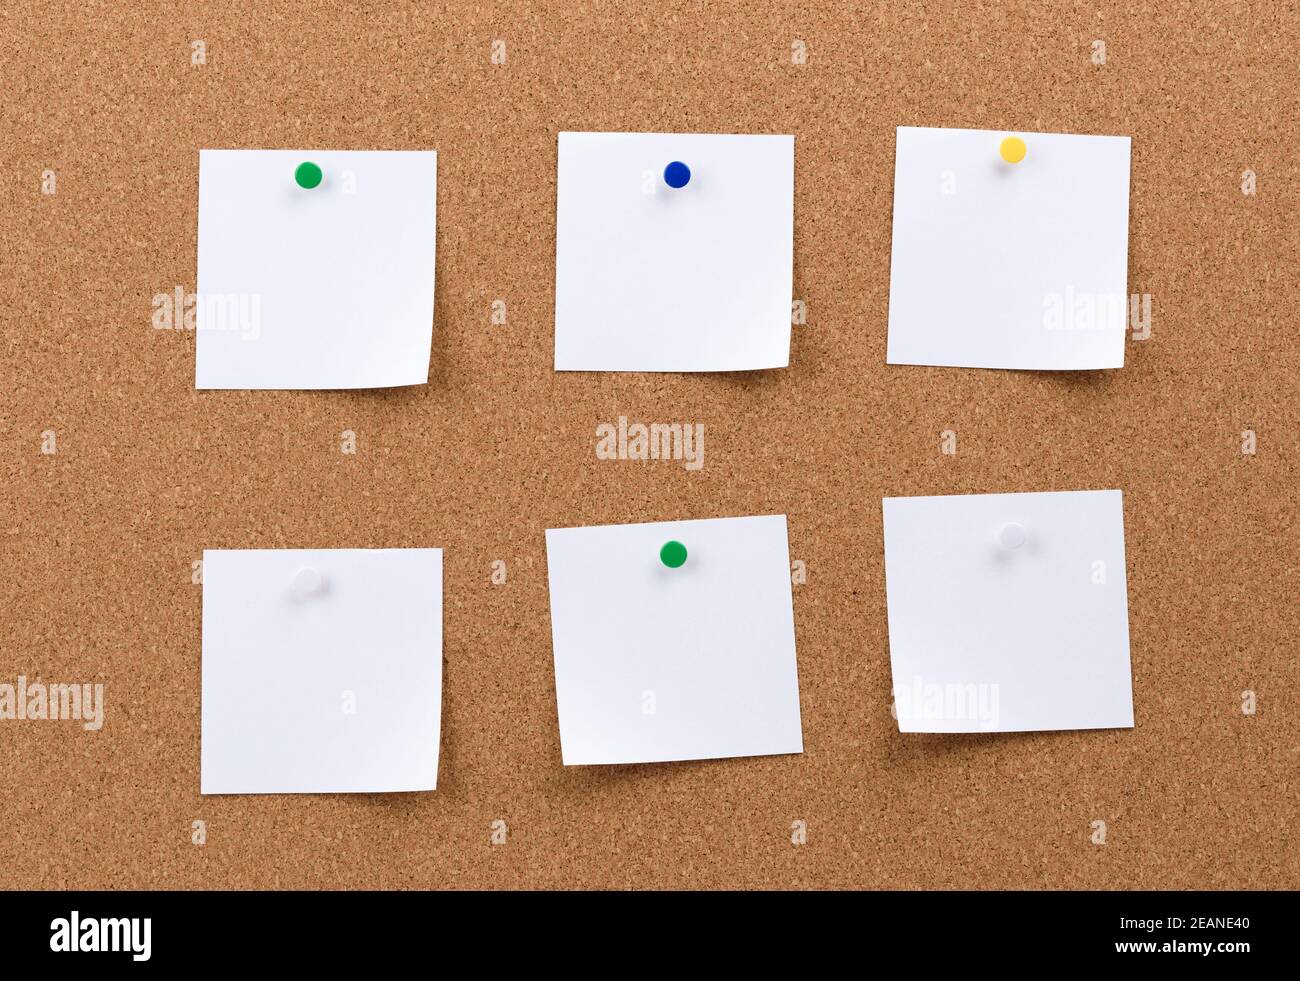 white square blank pieces of paper pinned on a cork board Stock Photo